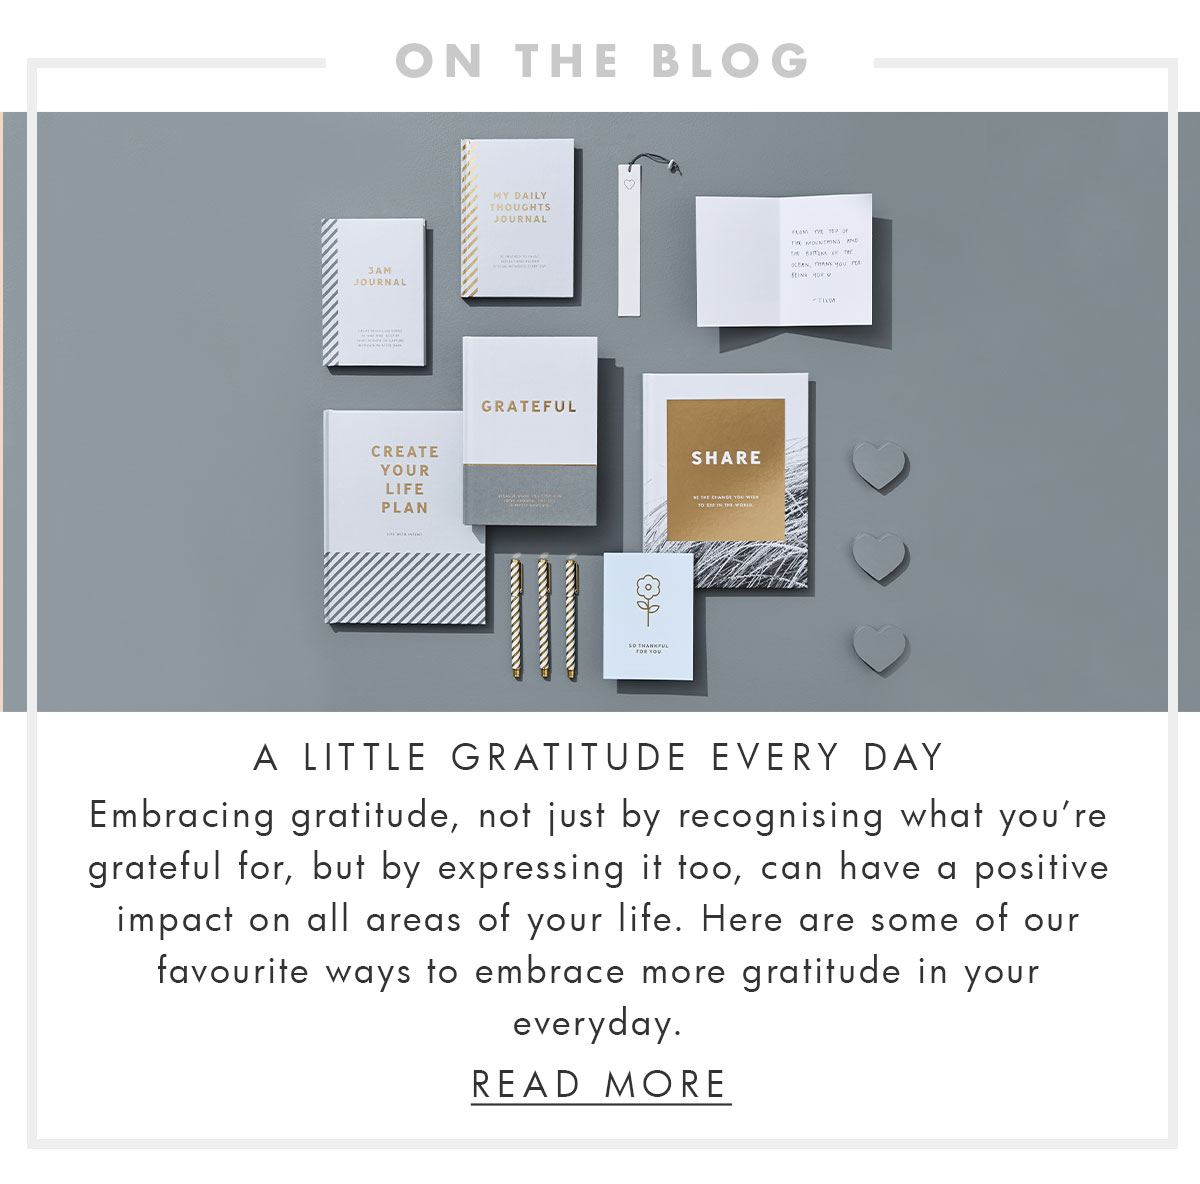 On the blog. A little gratitude every day. Read more. 